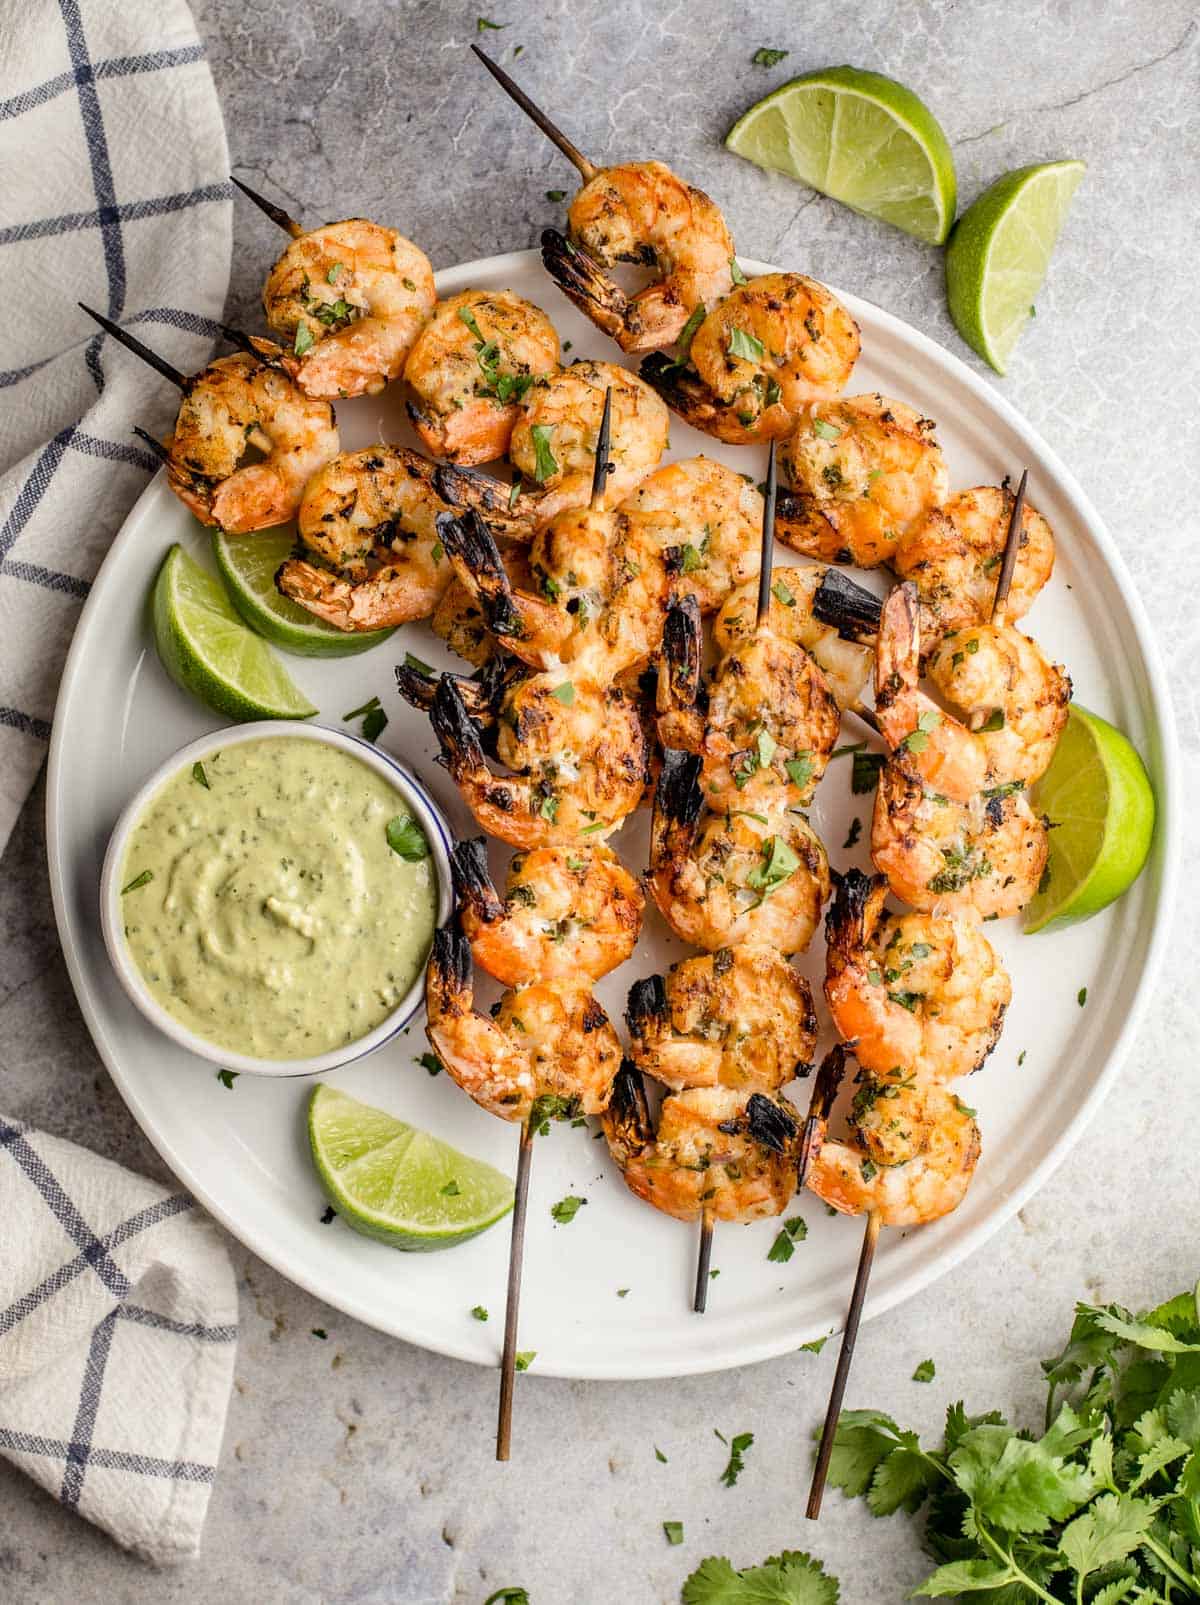 Cilantro Lime Shrimp on skewers on a white plate with a side of avocado cilantro dipping sauce